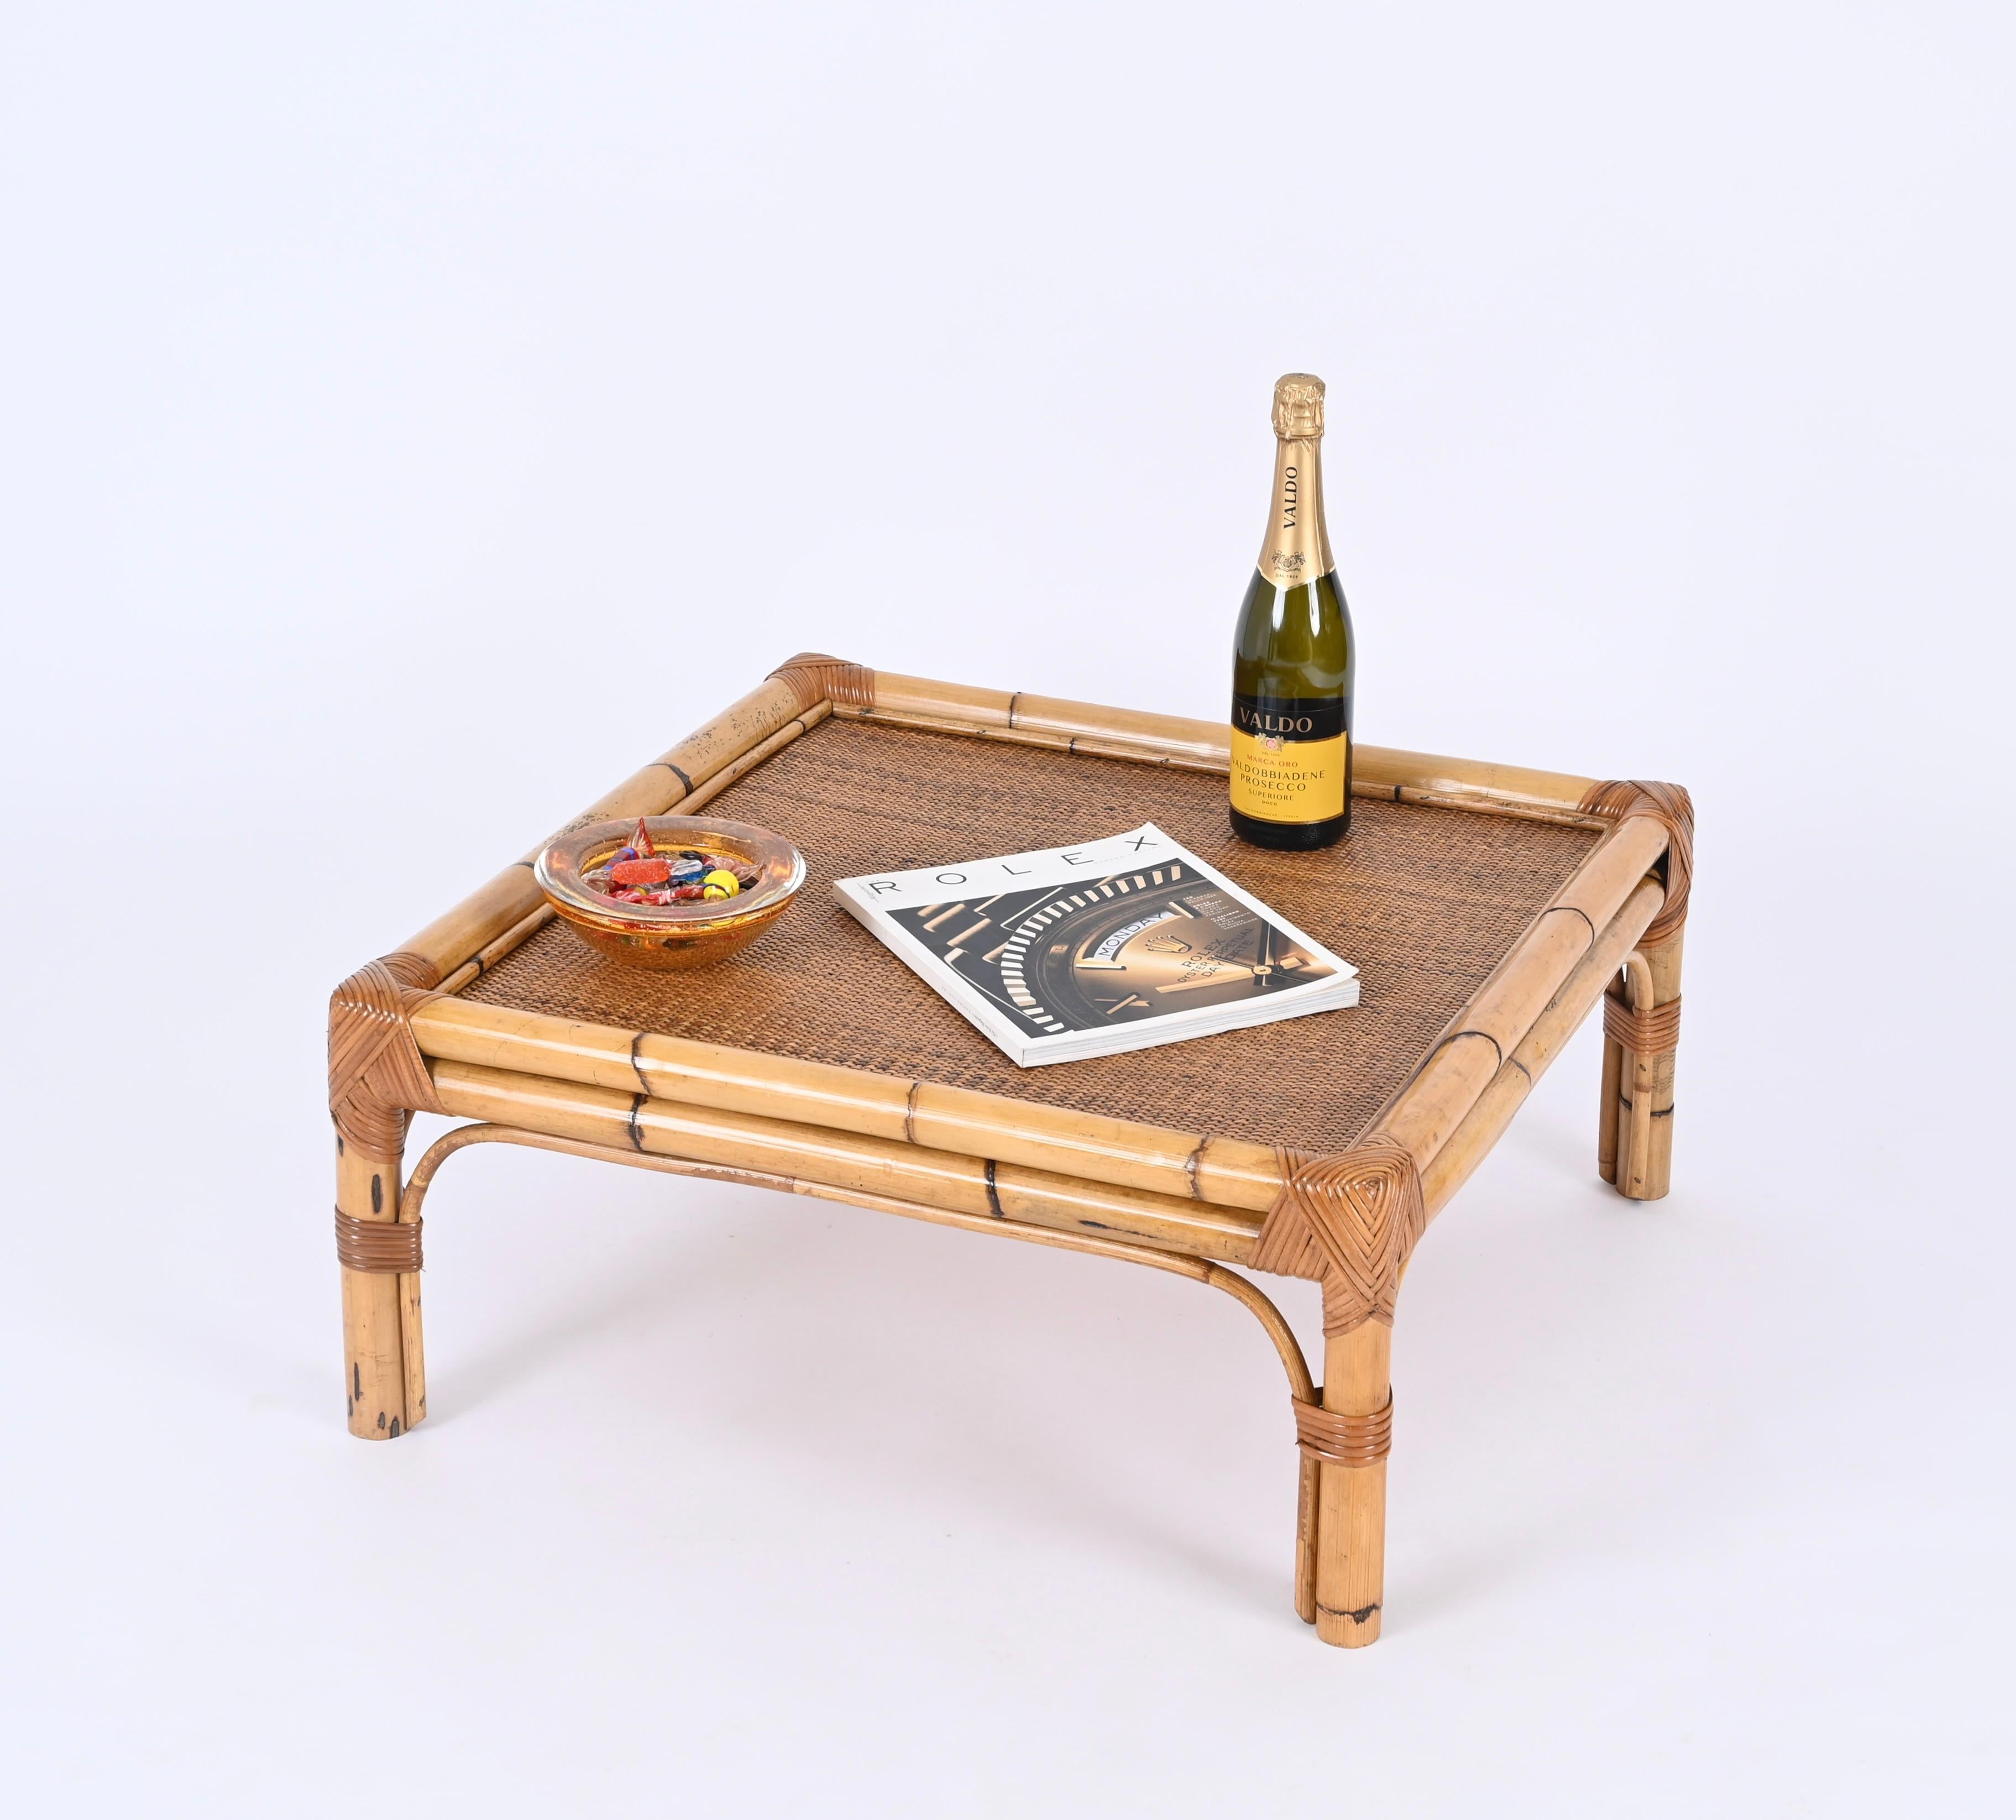 Fantastic French Riviera style square coffee table in bamboo, rattan and wicker. This lovely coffee table was produced by Vivai del Sud in Italy in the 1970s. 

Handcrafted with perfect proportions, this table features a structure in solid bamboo